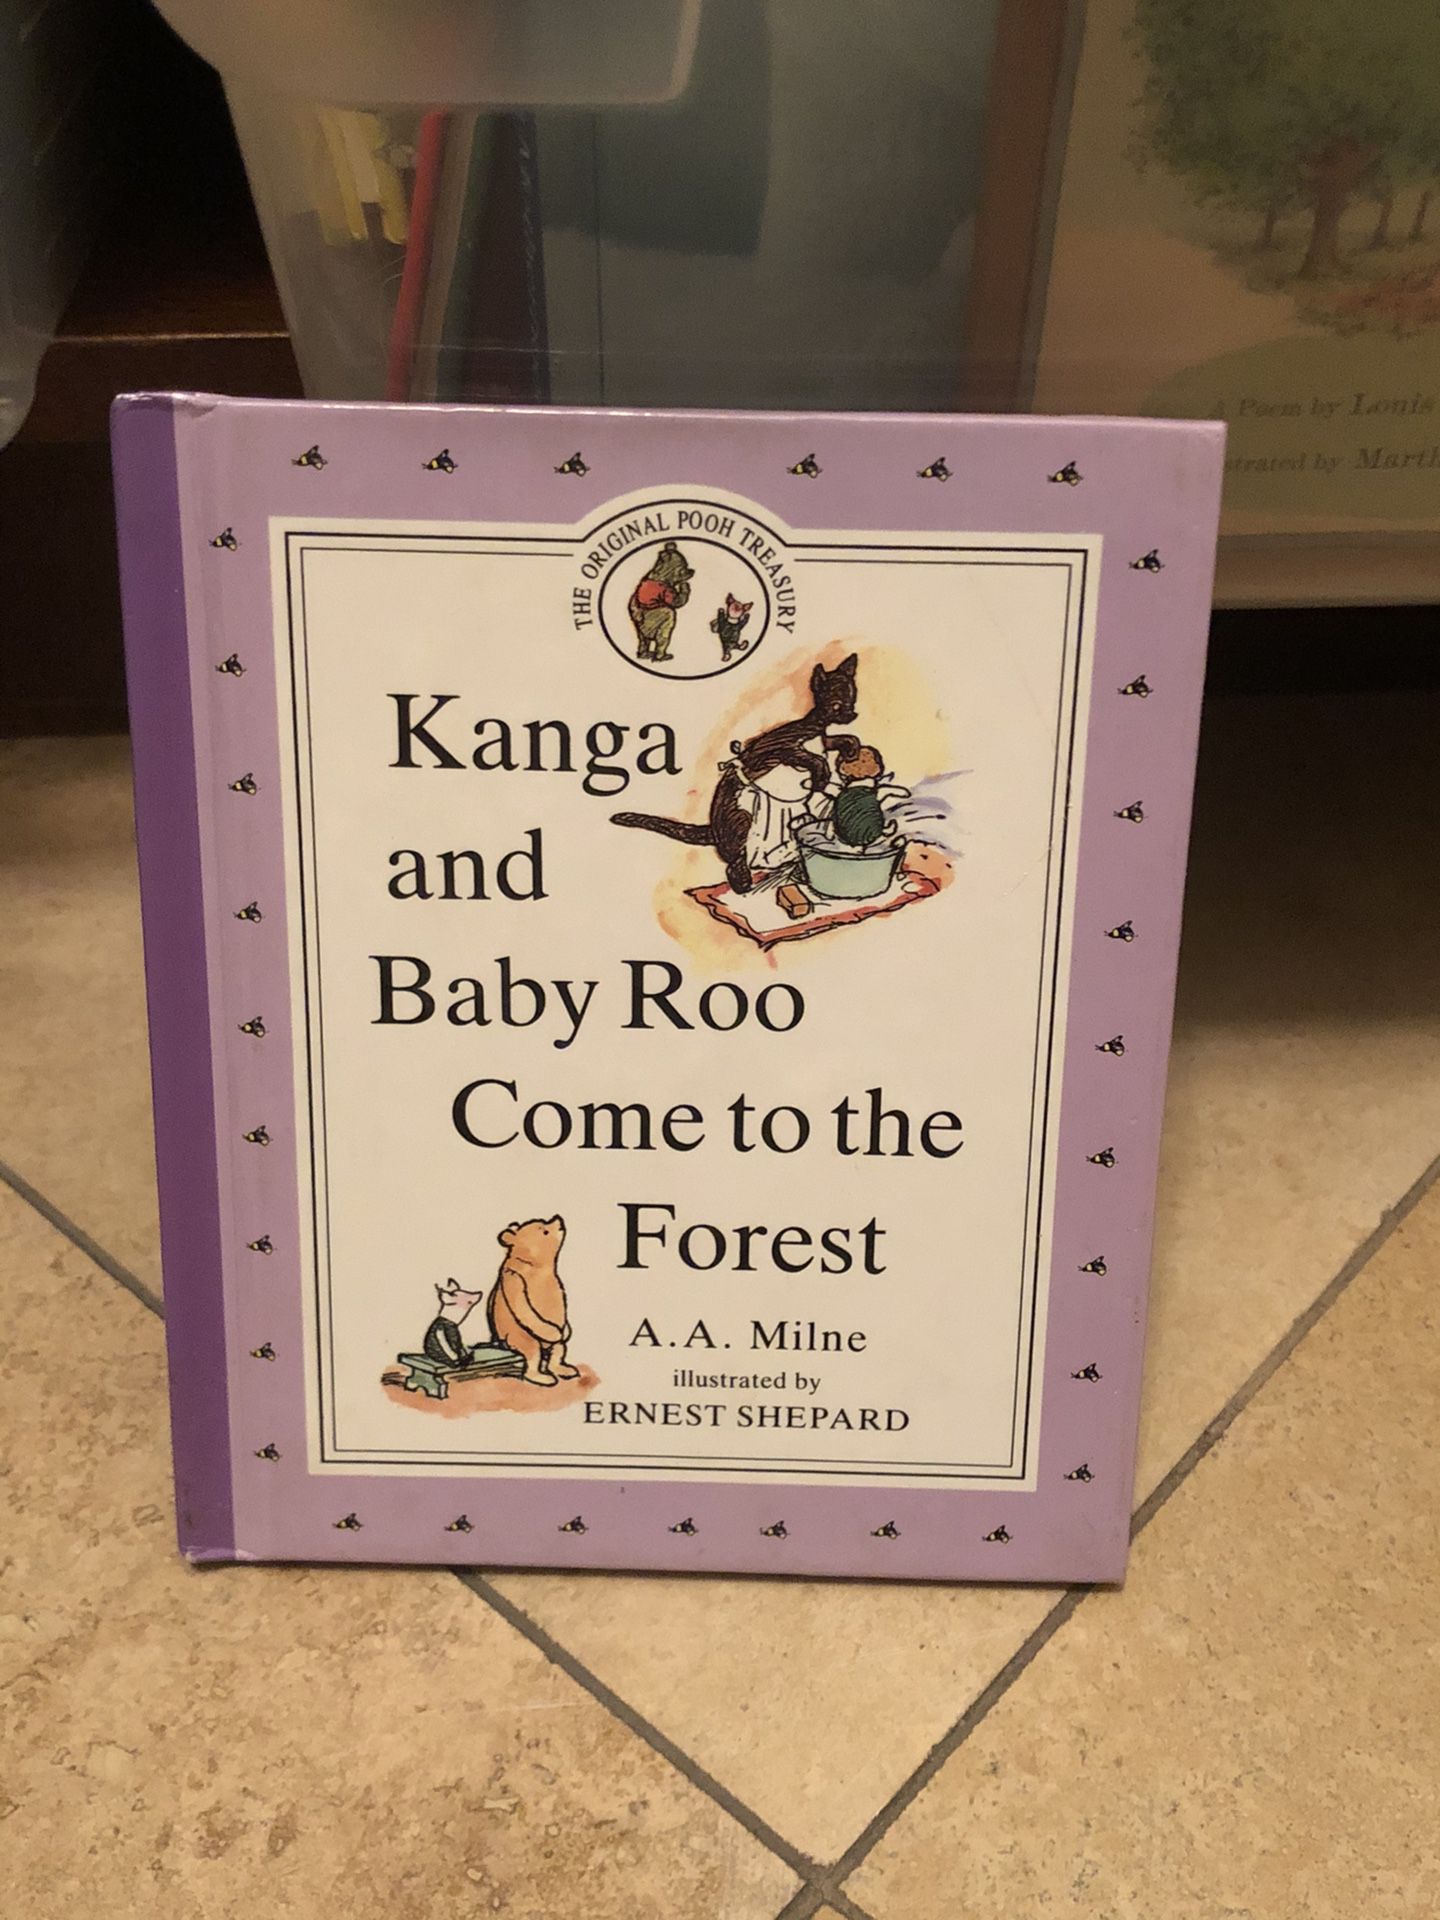 Vintage Disney Winnie the Pooh 1990 - the original Pooh treasury - Kanga and Baby Roo come to the forest classic children’s book ! When Pooh meets Ro